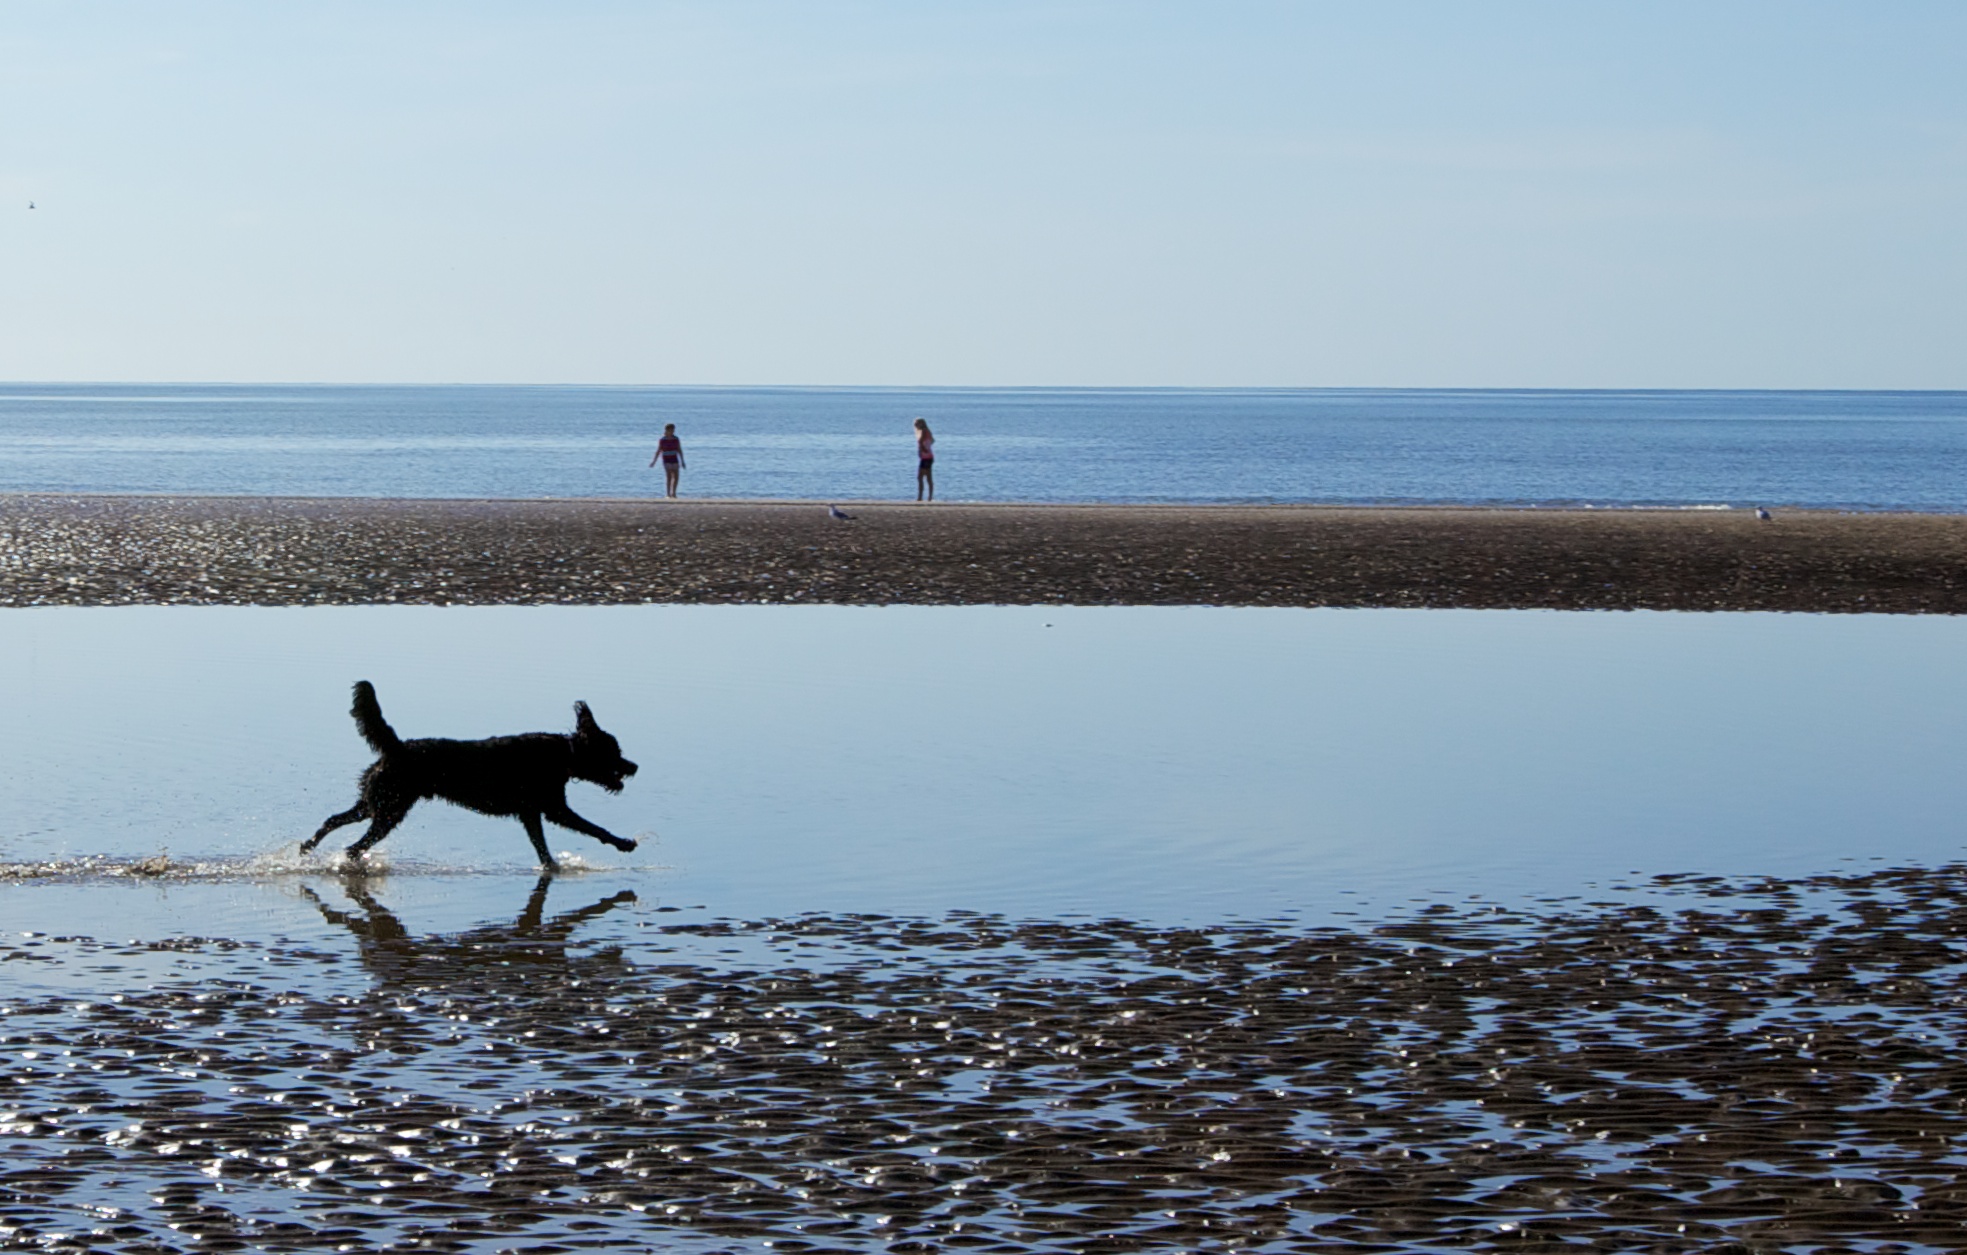 dog running on beach with people in distance